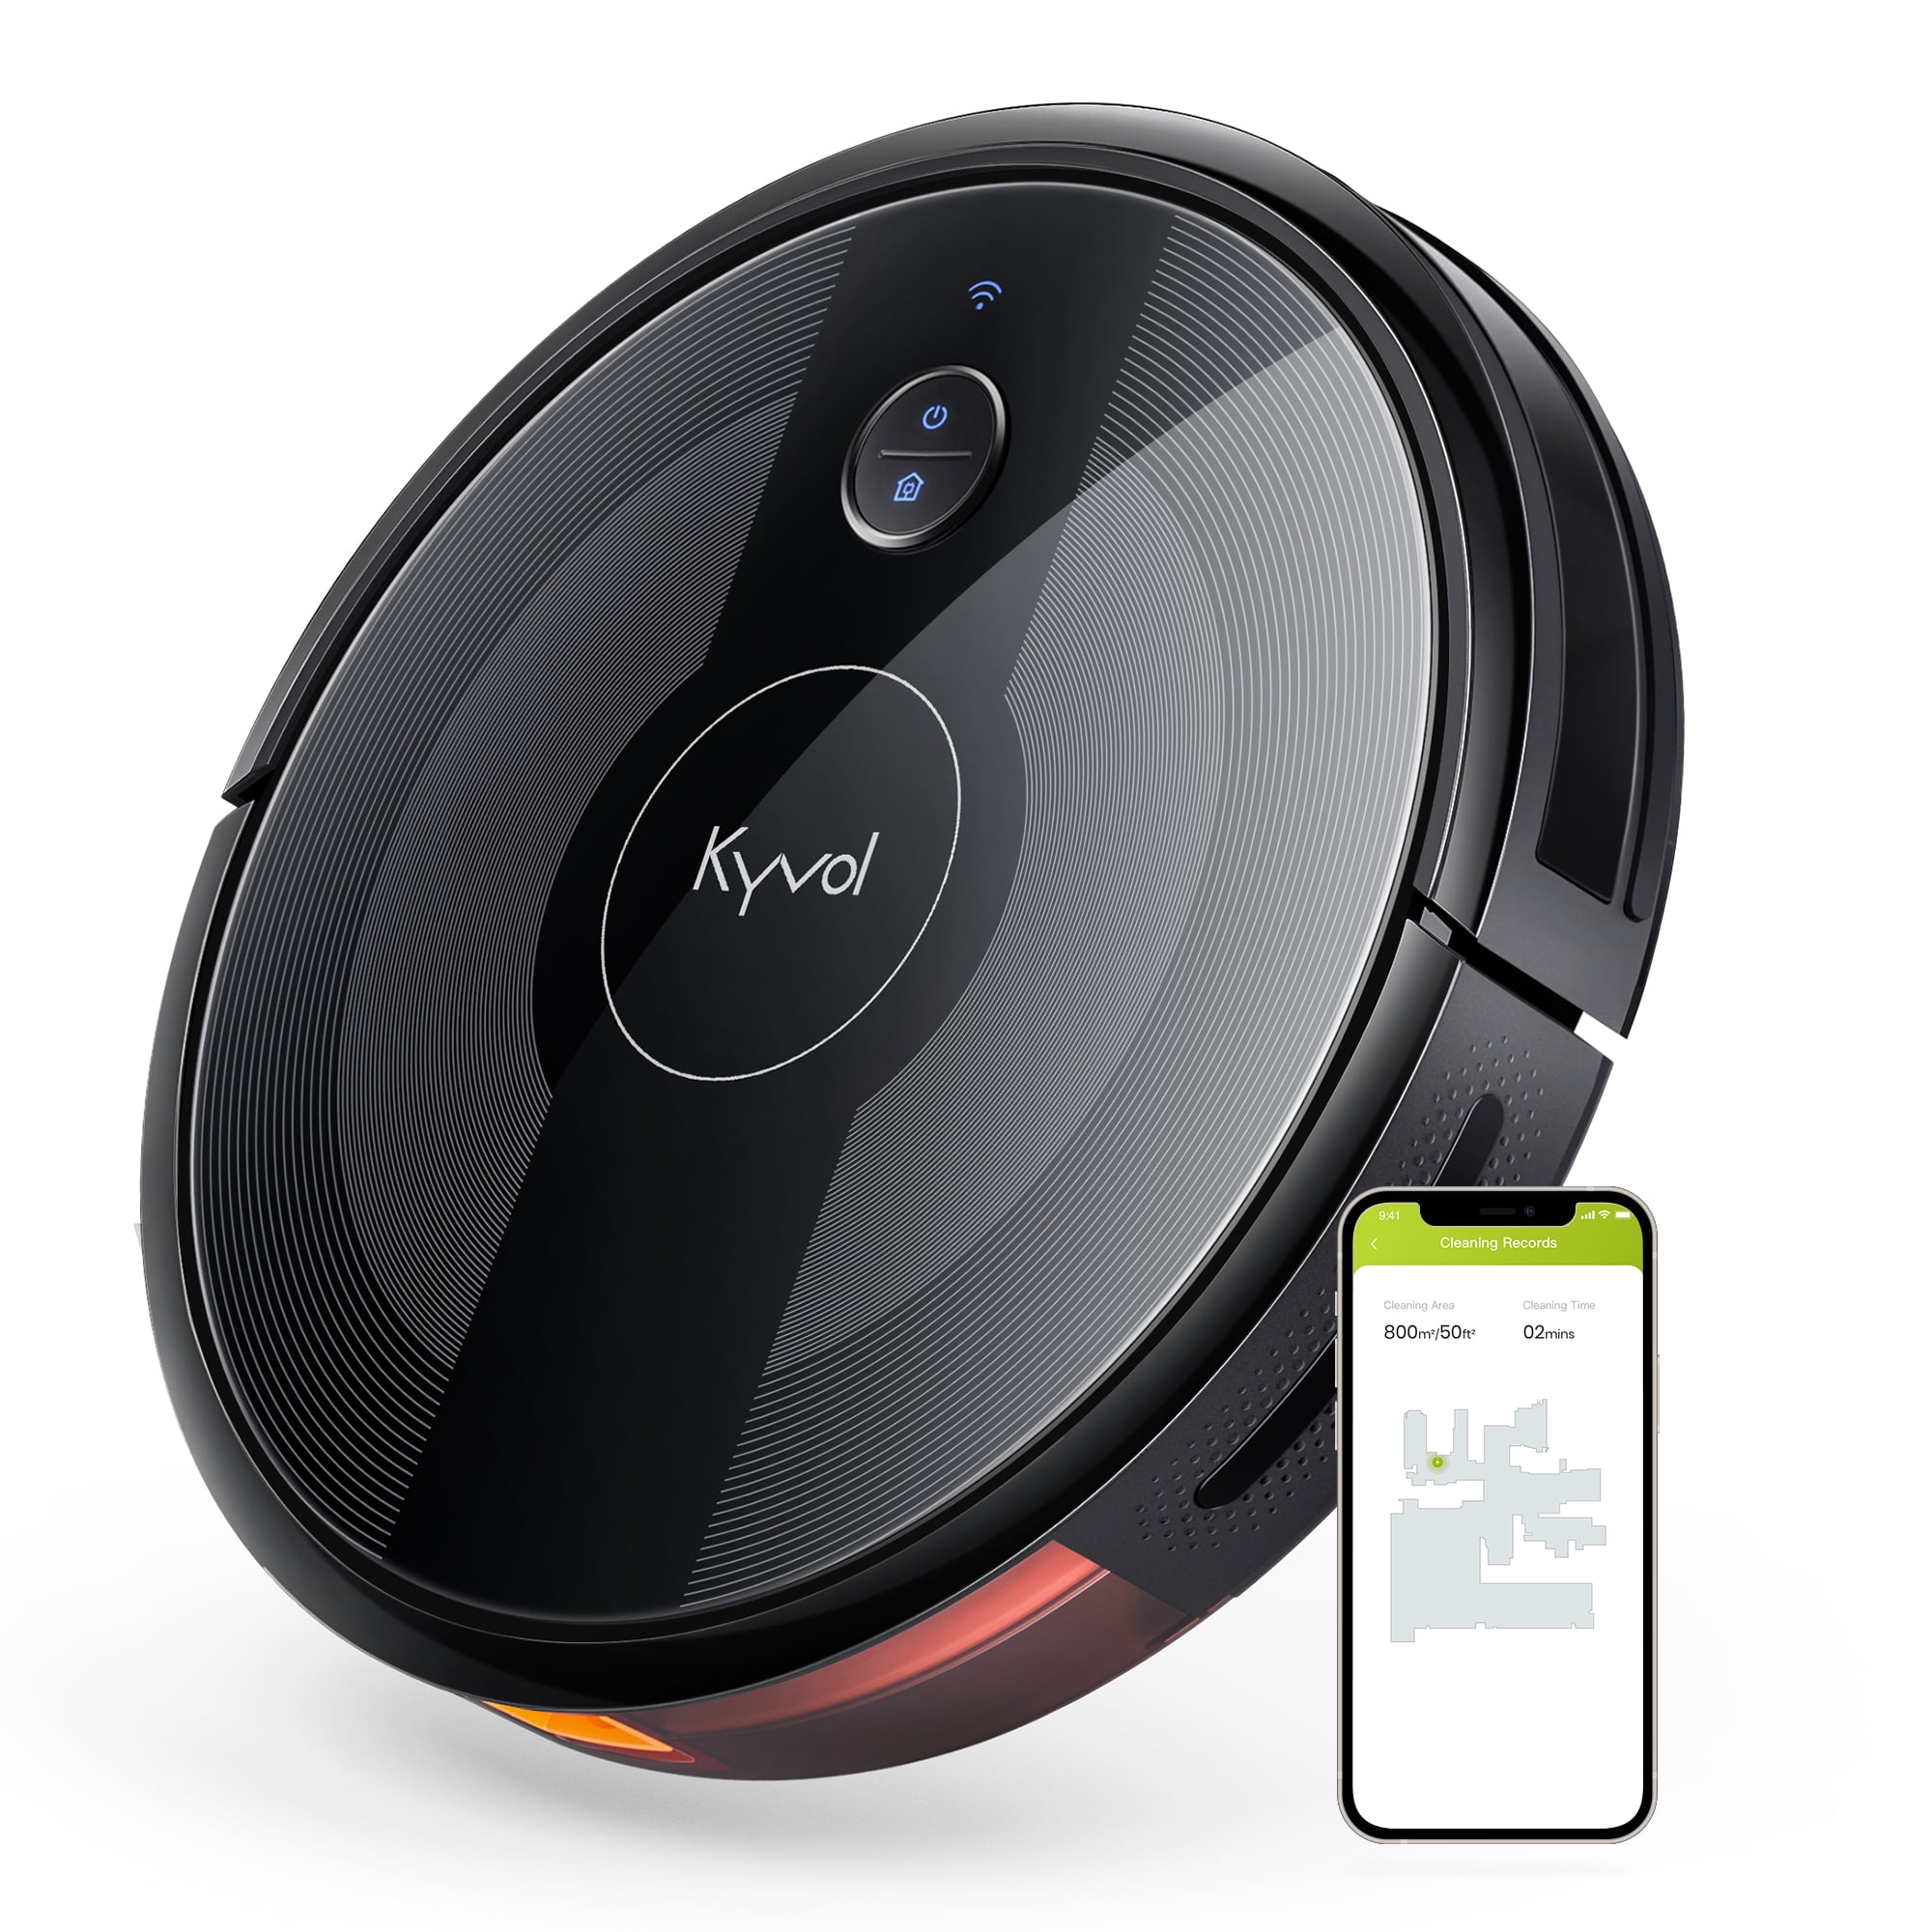 Details about   Shark IQ RV1001 Robot Vacuum Multi-Room Self-Cleaning WiFi & Alexa Free Shipping 